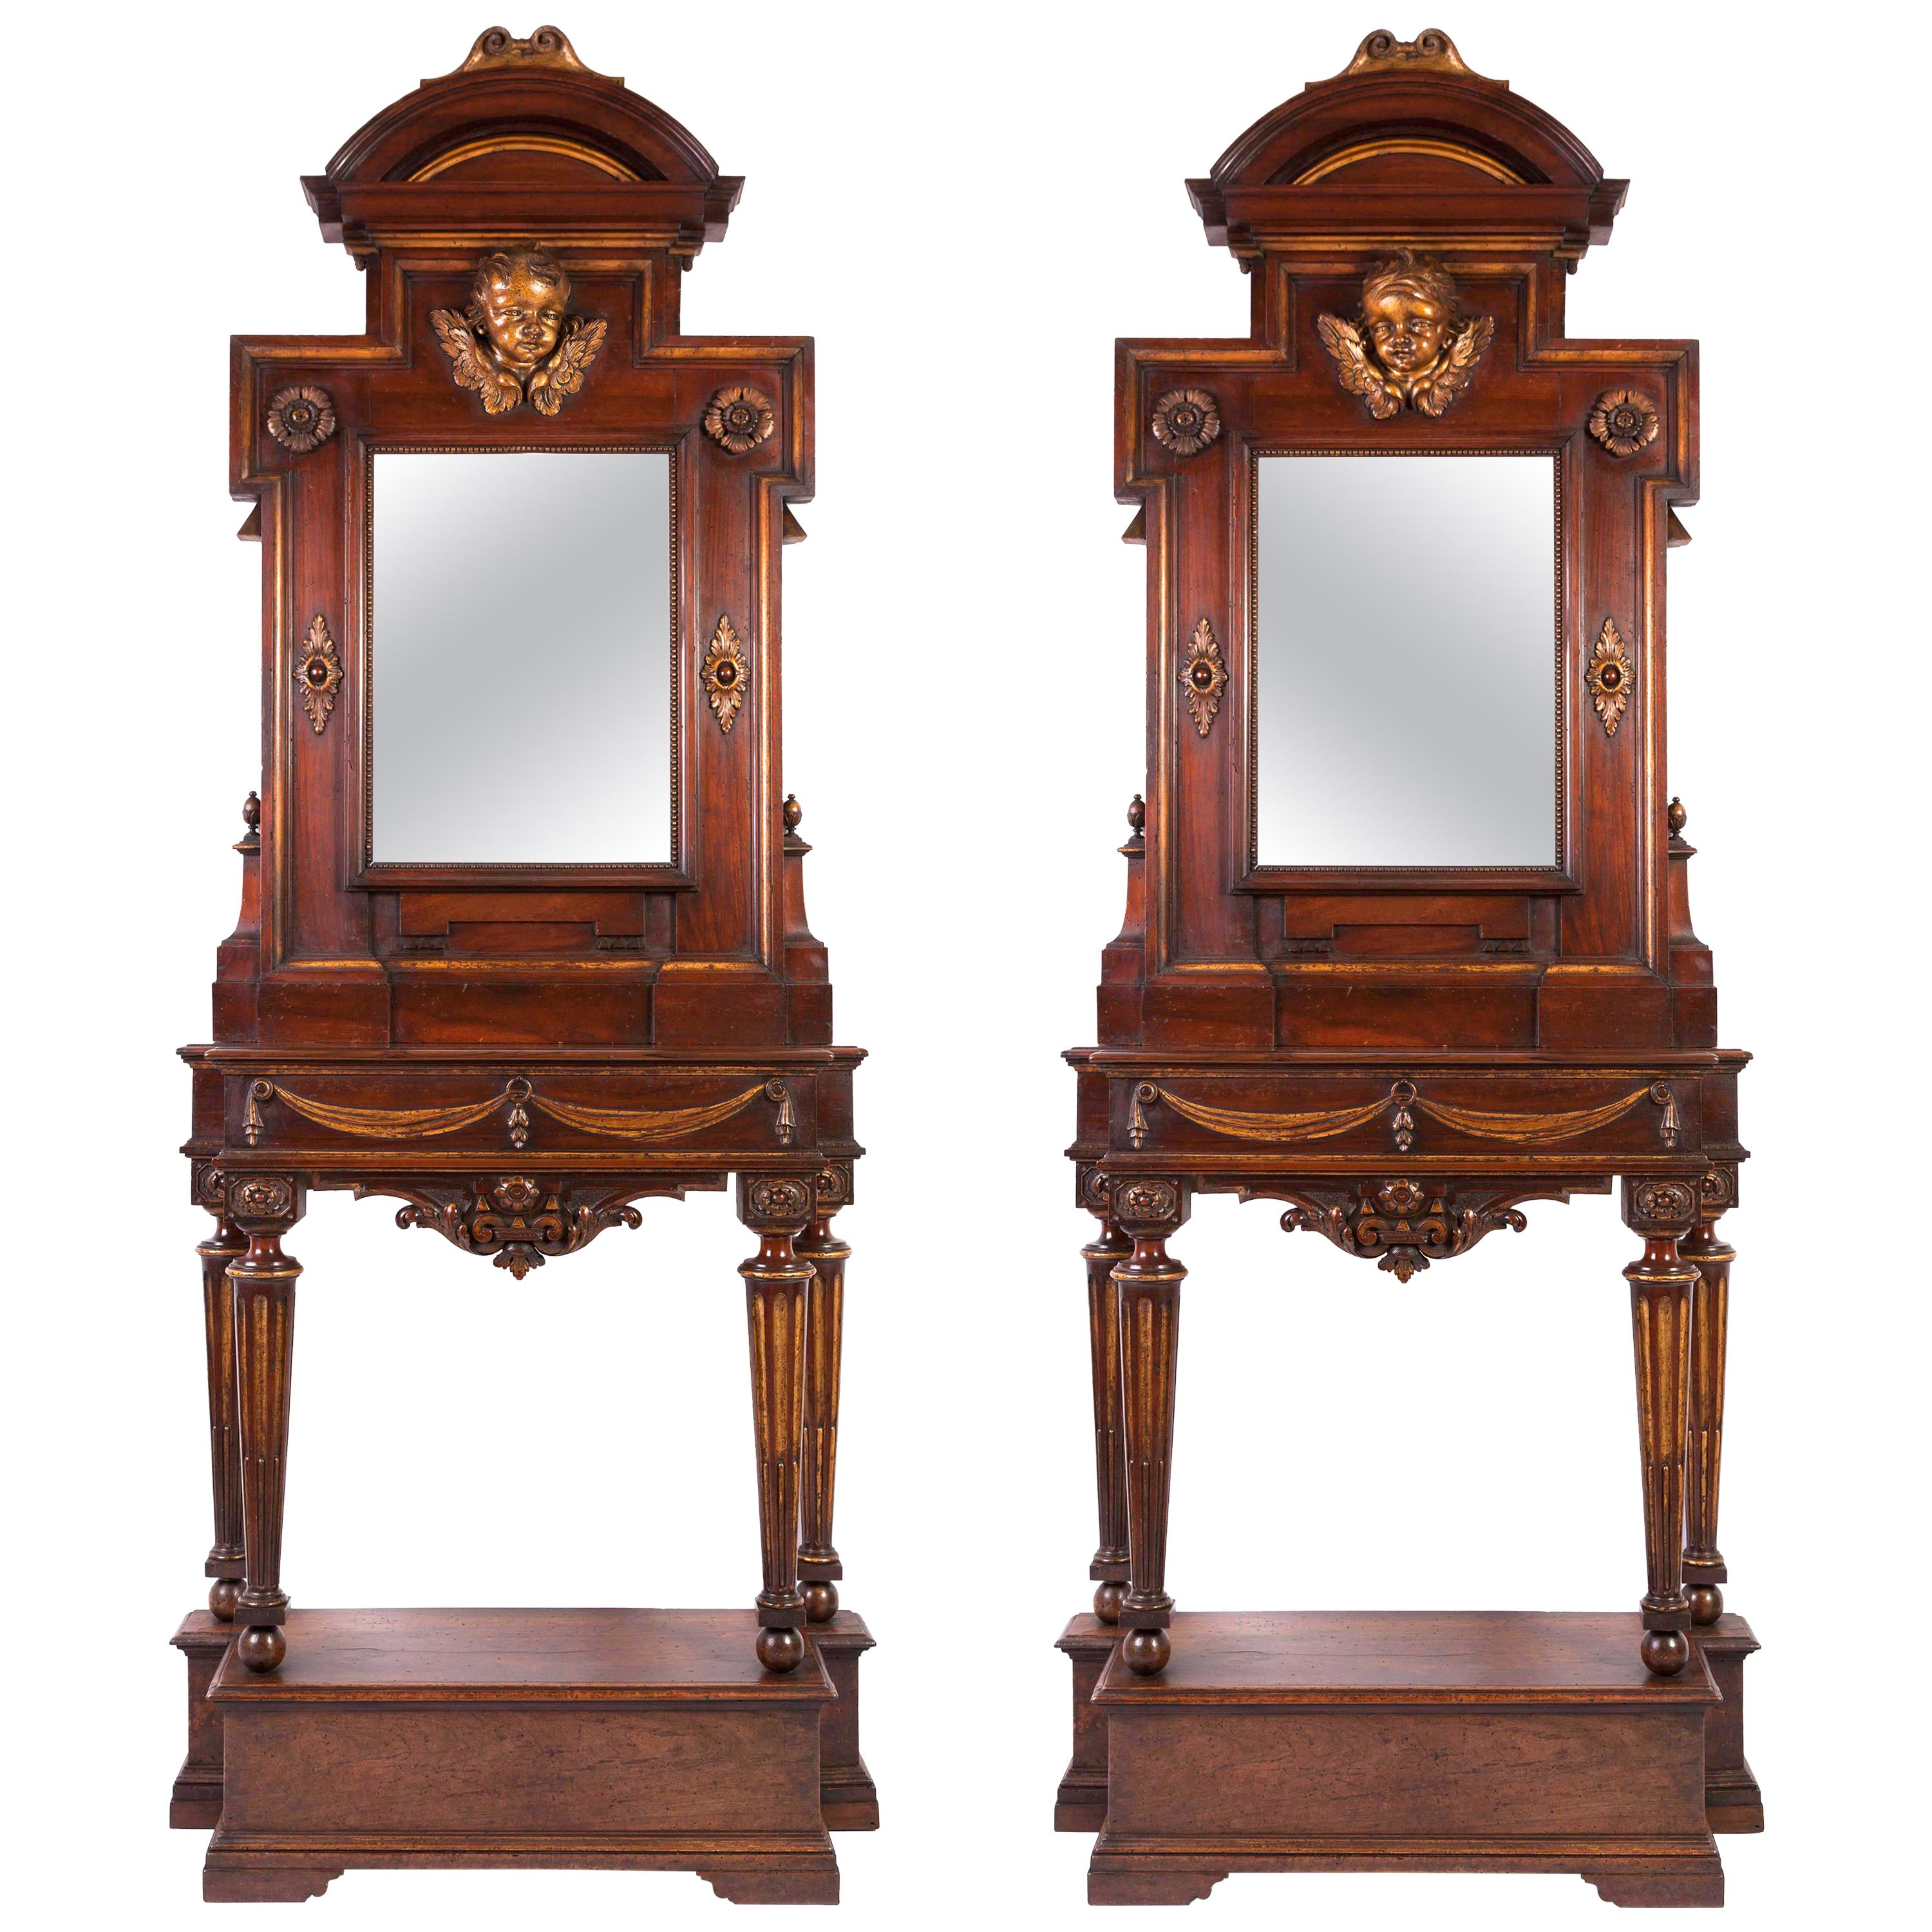  Console Tables with Matching Mirrors, Italian circa 1750 (Pair) For Sale